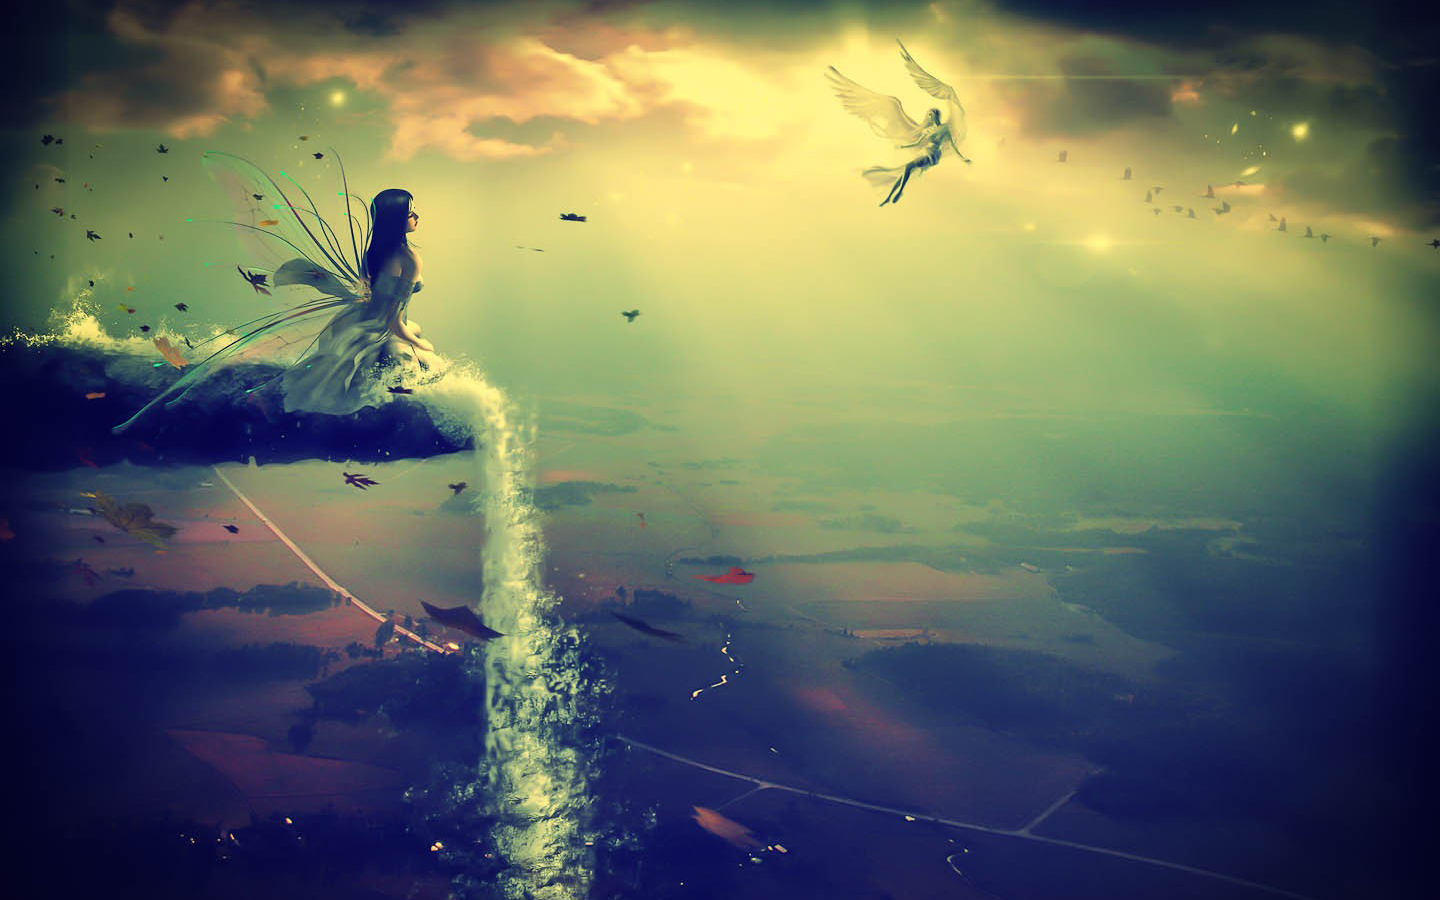 fantasy, Fairy, Wings, Magic, Children, Pixie, Sparkle, Landscapes, Mountains, Waterfall, Sky, Clouds, Scenic, Art, Artistic, Cg, Digital, Art, Mood, Emotion Wallpaper